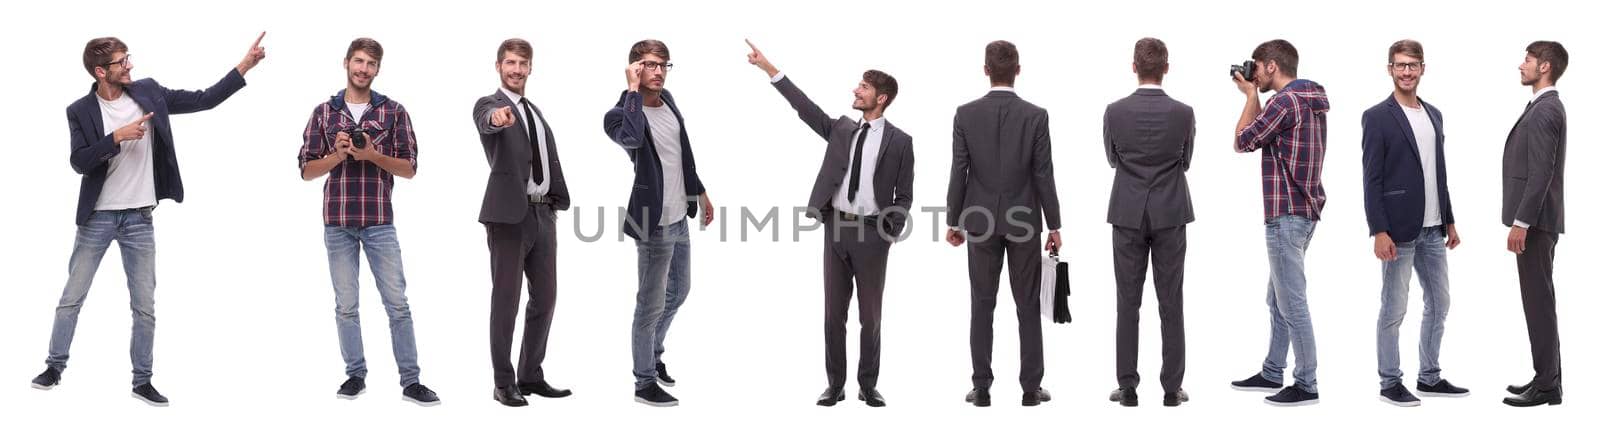 panoramic collage of self-motivated young man .isolated on white by asdf